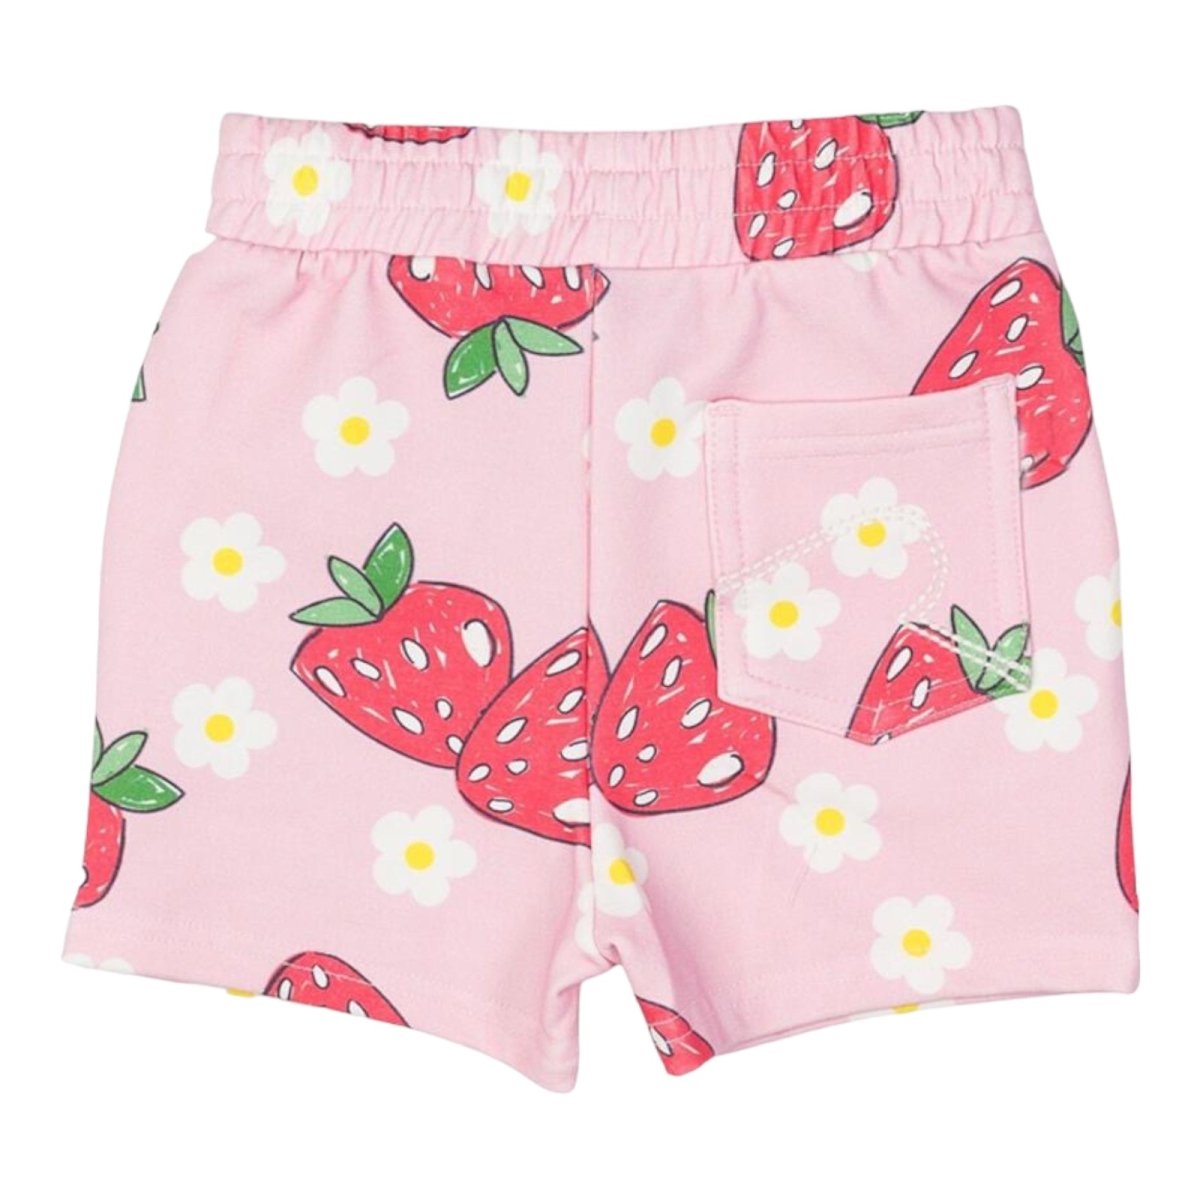 BERRY MUCH SHORTS - SHORTS